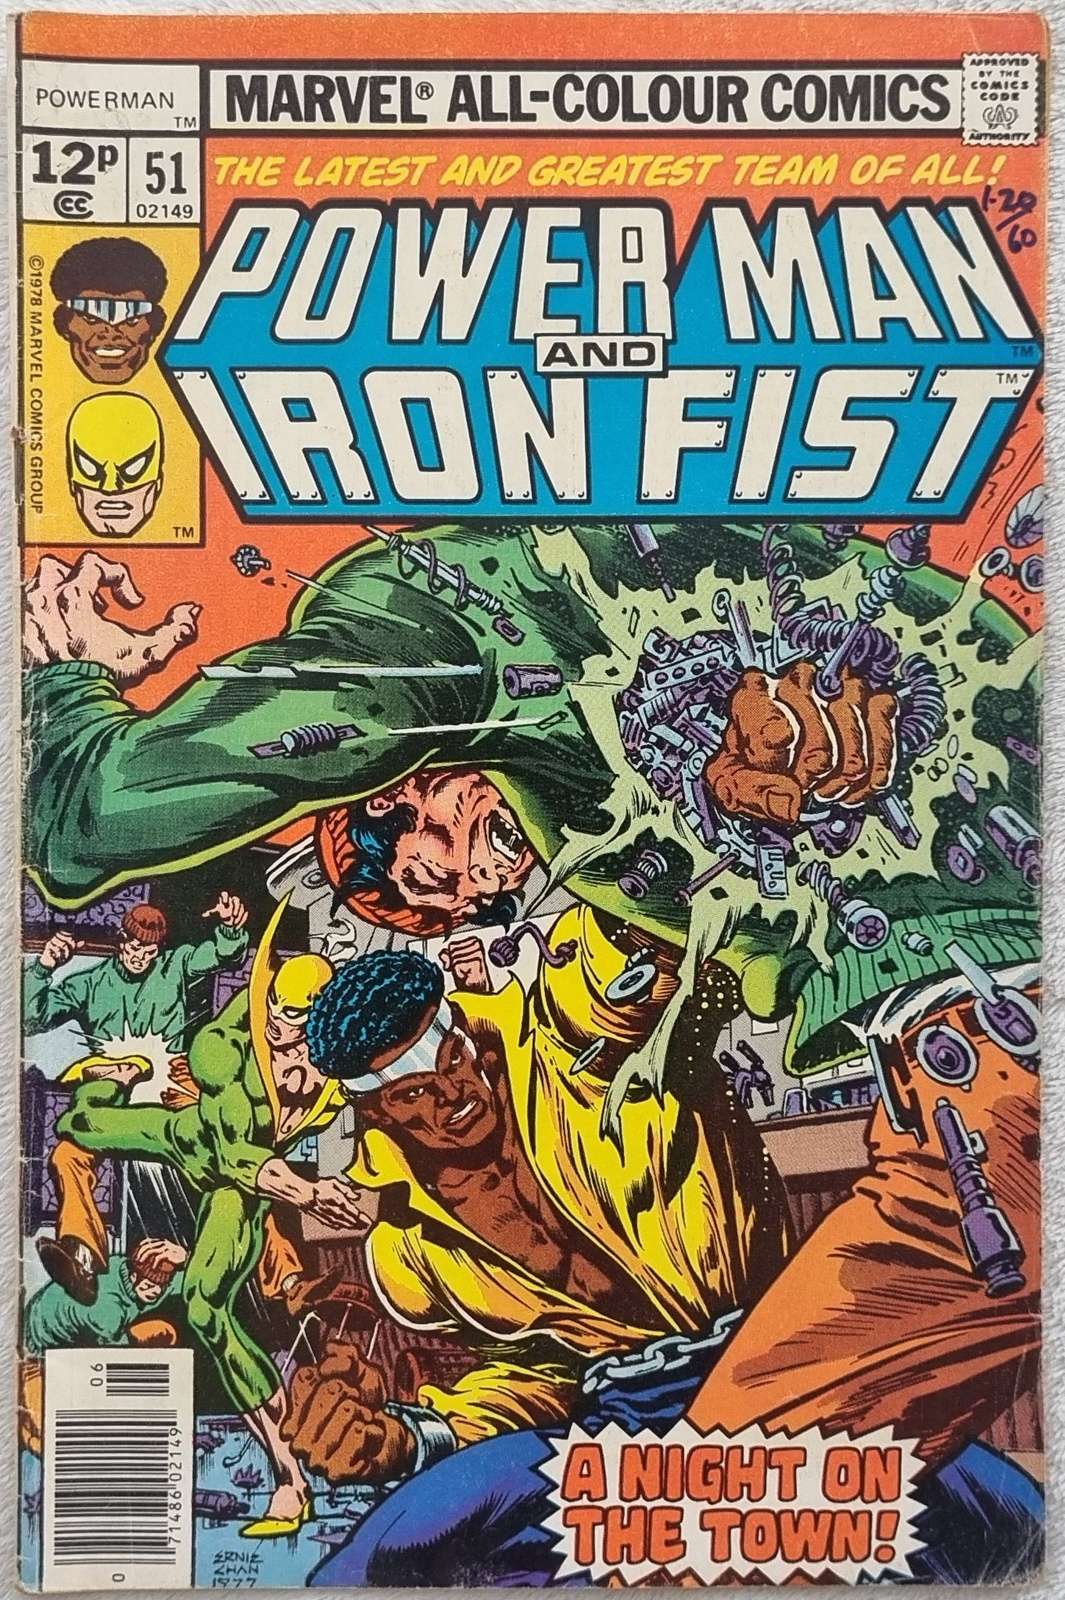 Power Man and Iron Fist - #51 - VF-